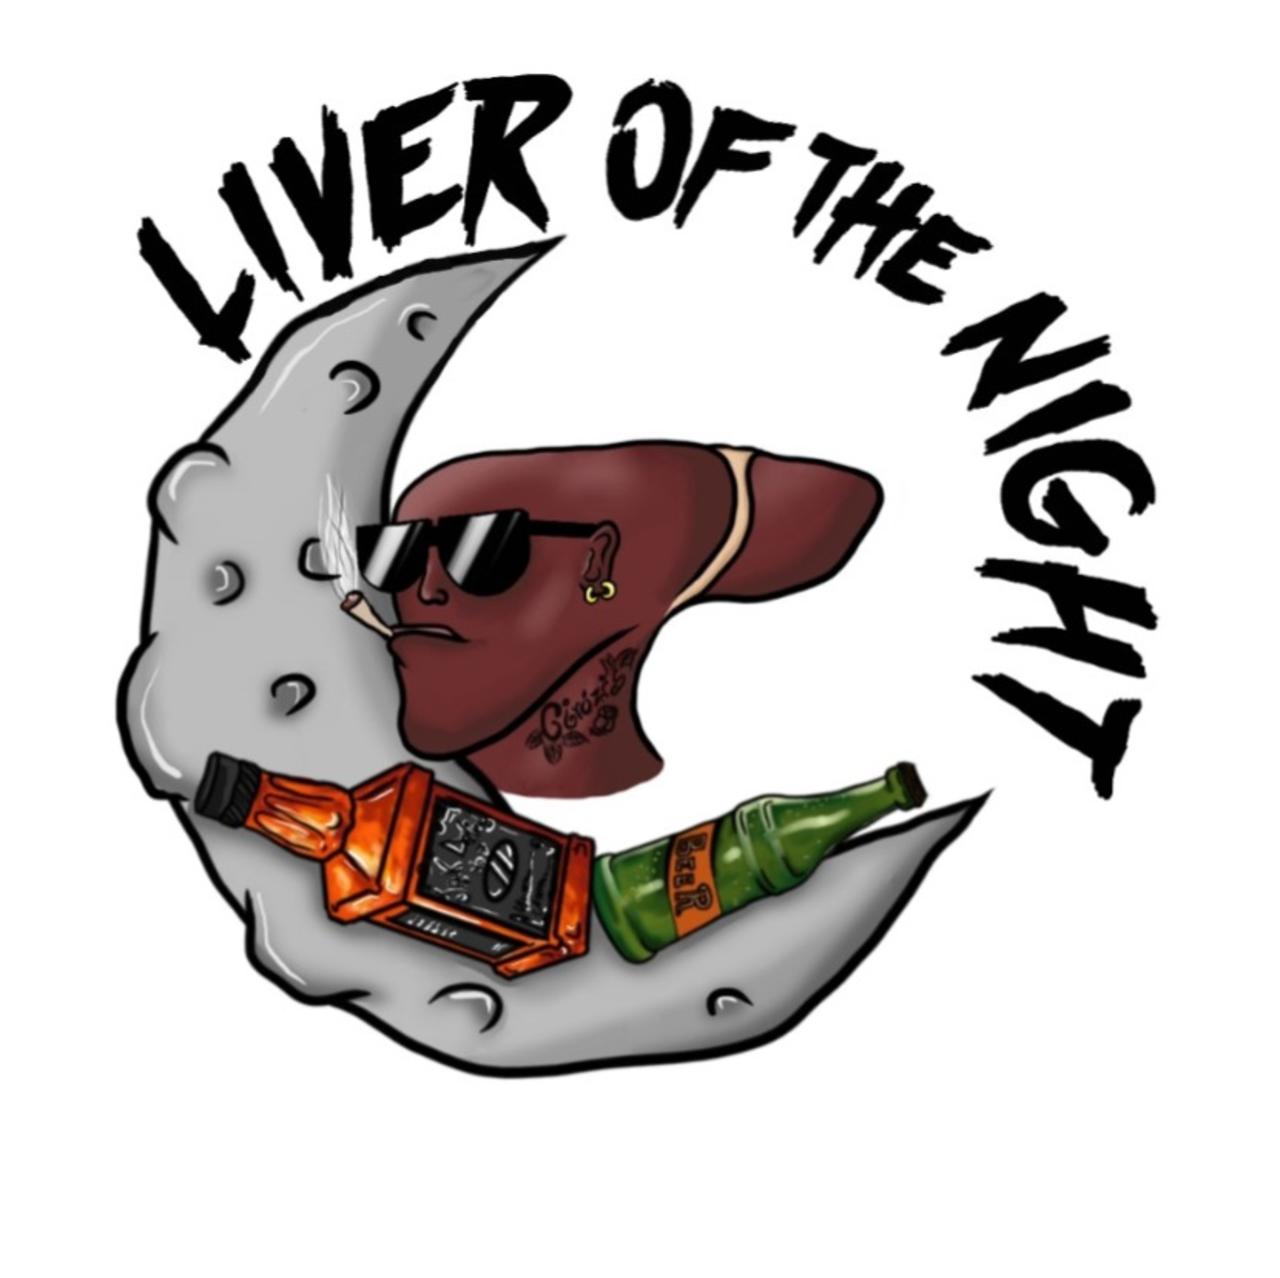 LIVER OF THE NIGHT